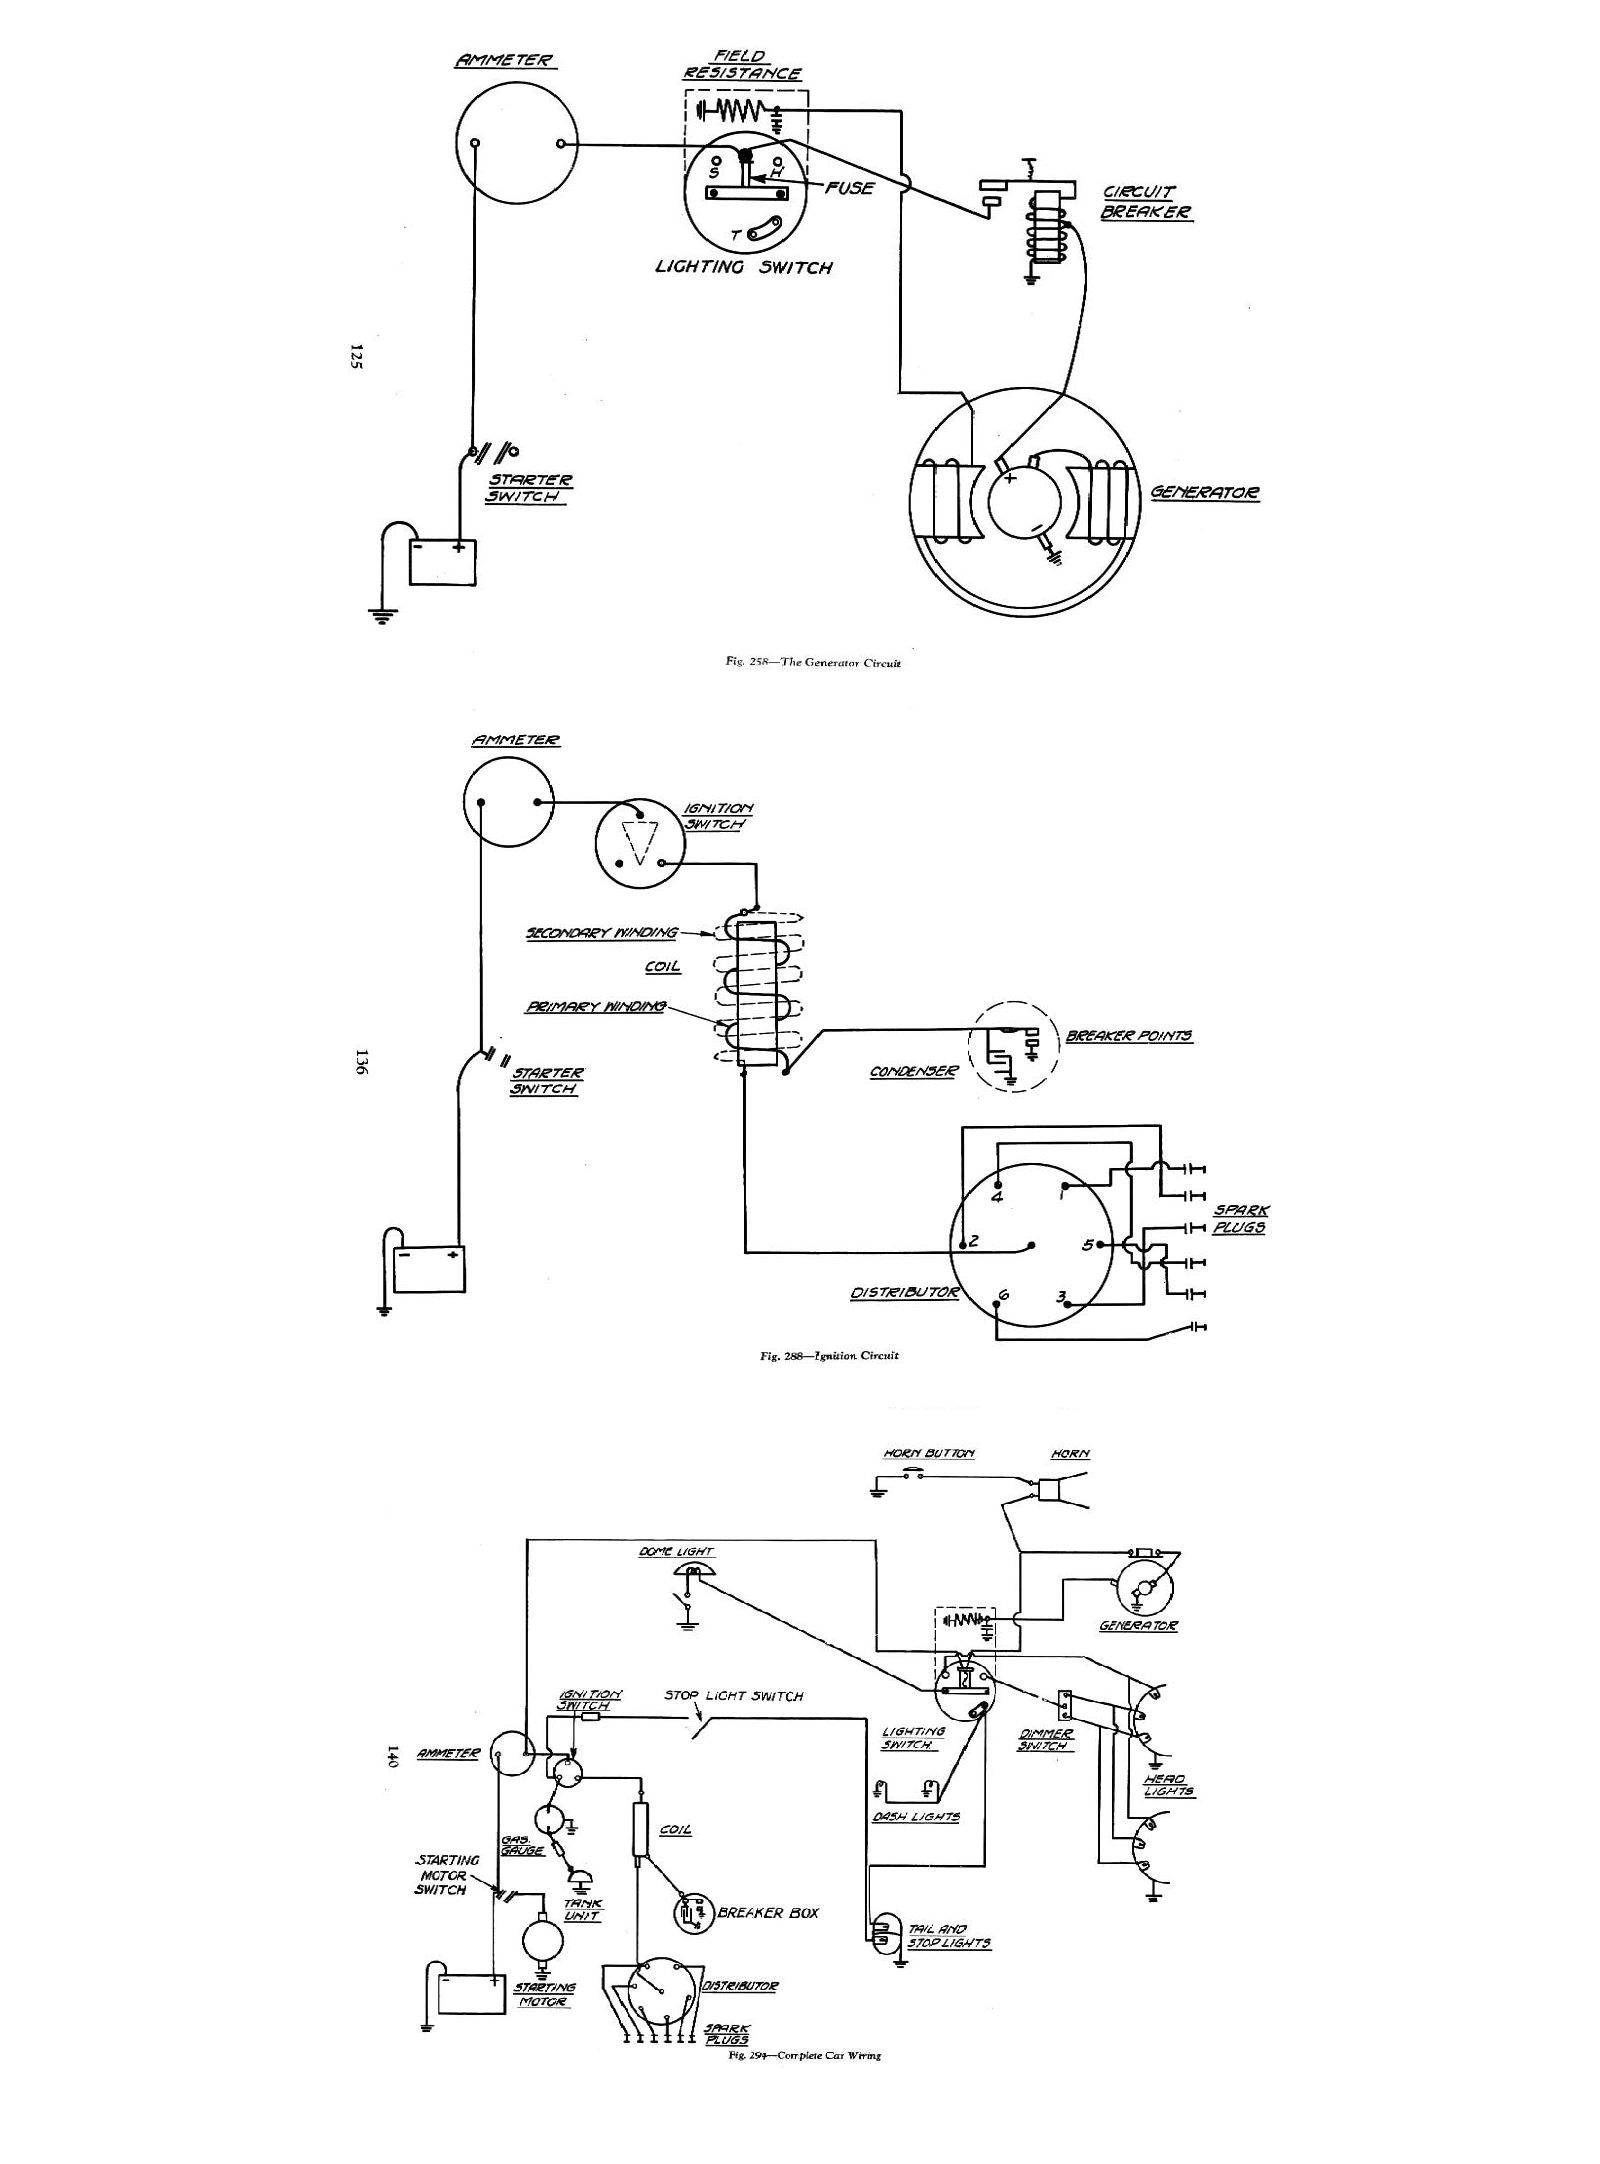 Delco Remy Alternator Wiring Diagram from chevy.oldcarmanualproject.com